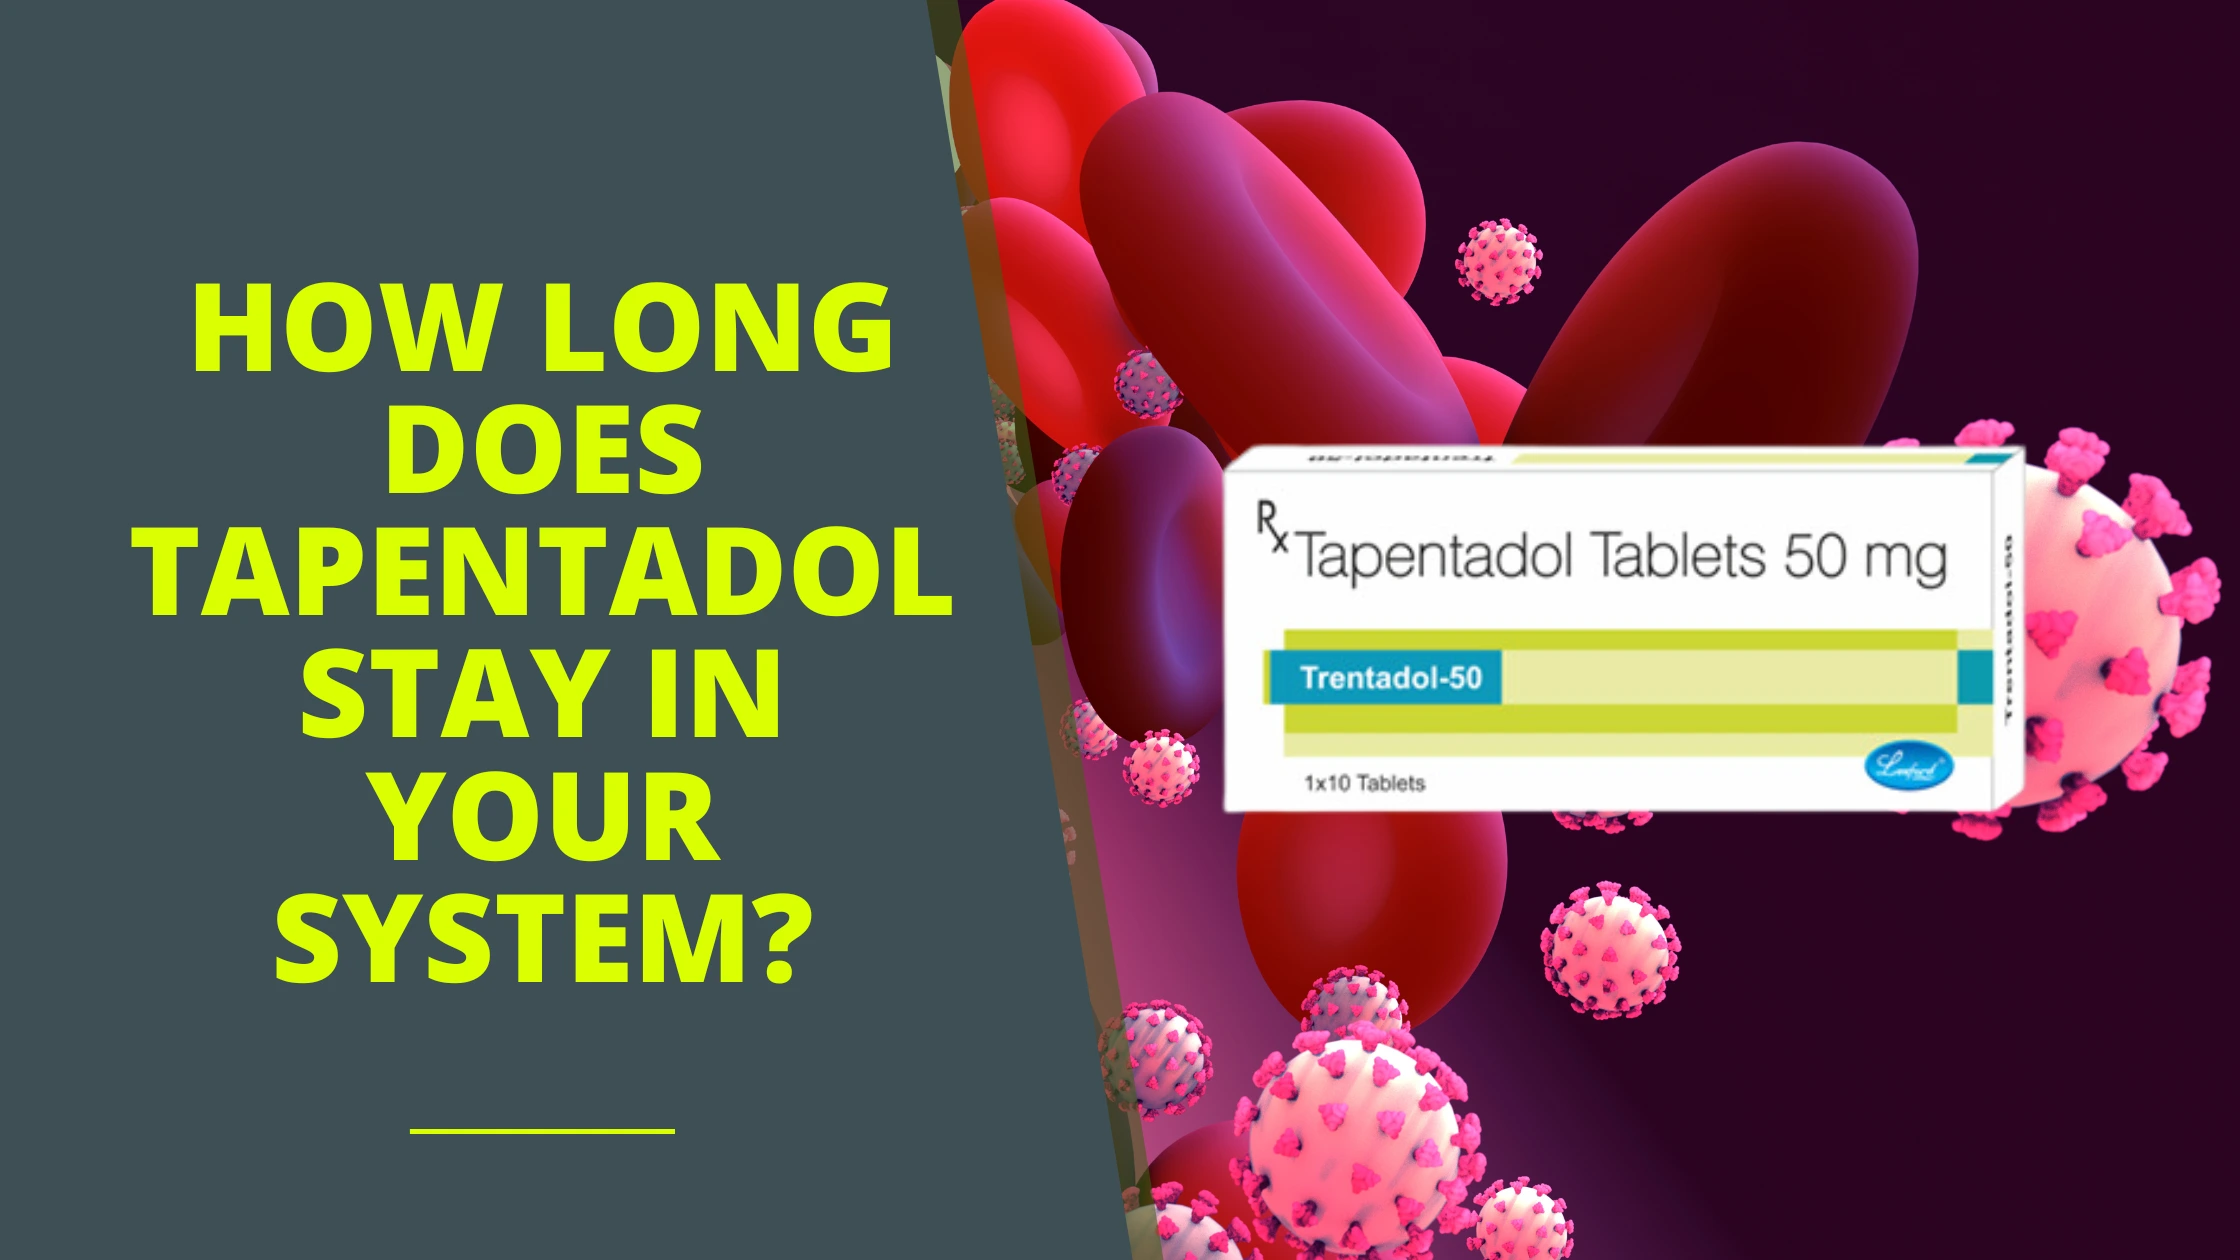 How long does Tapentadol stay in your system?